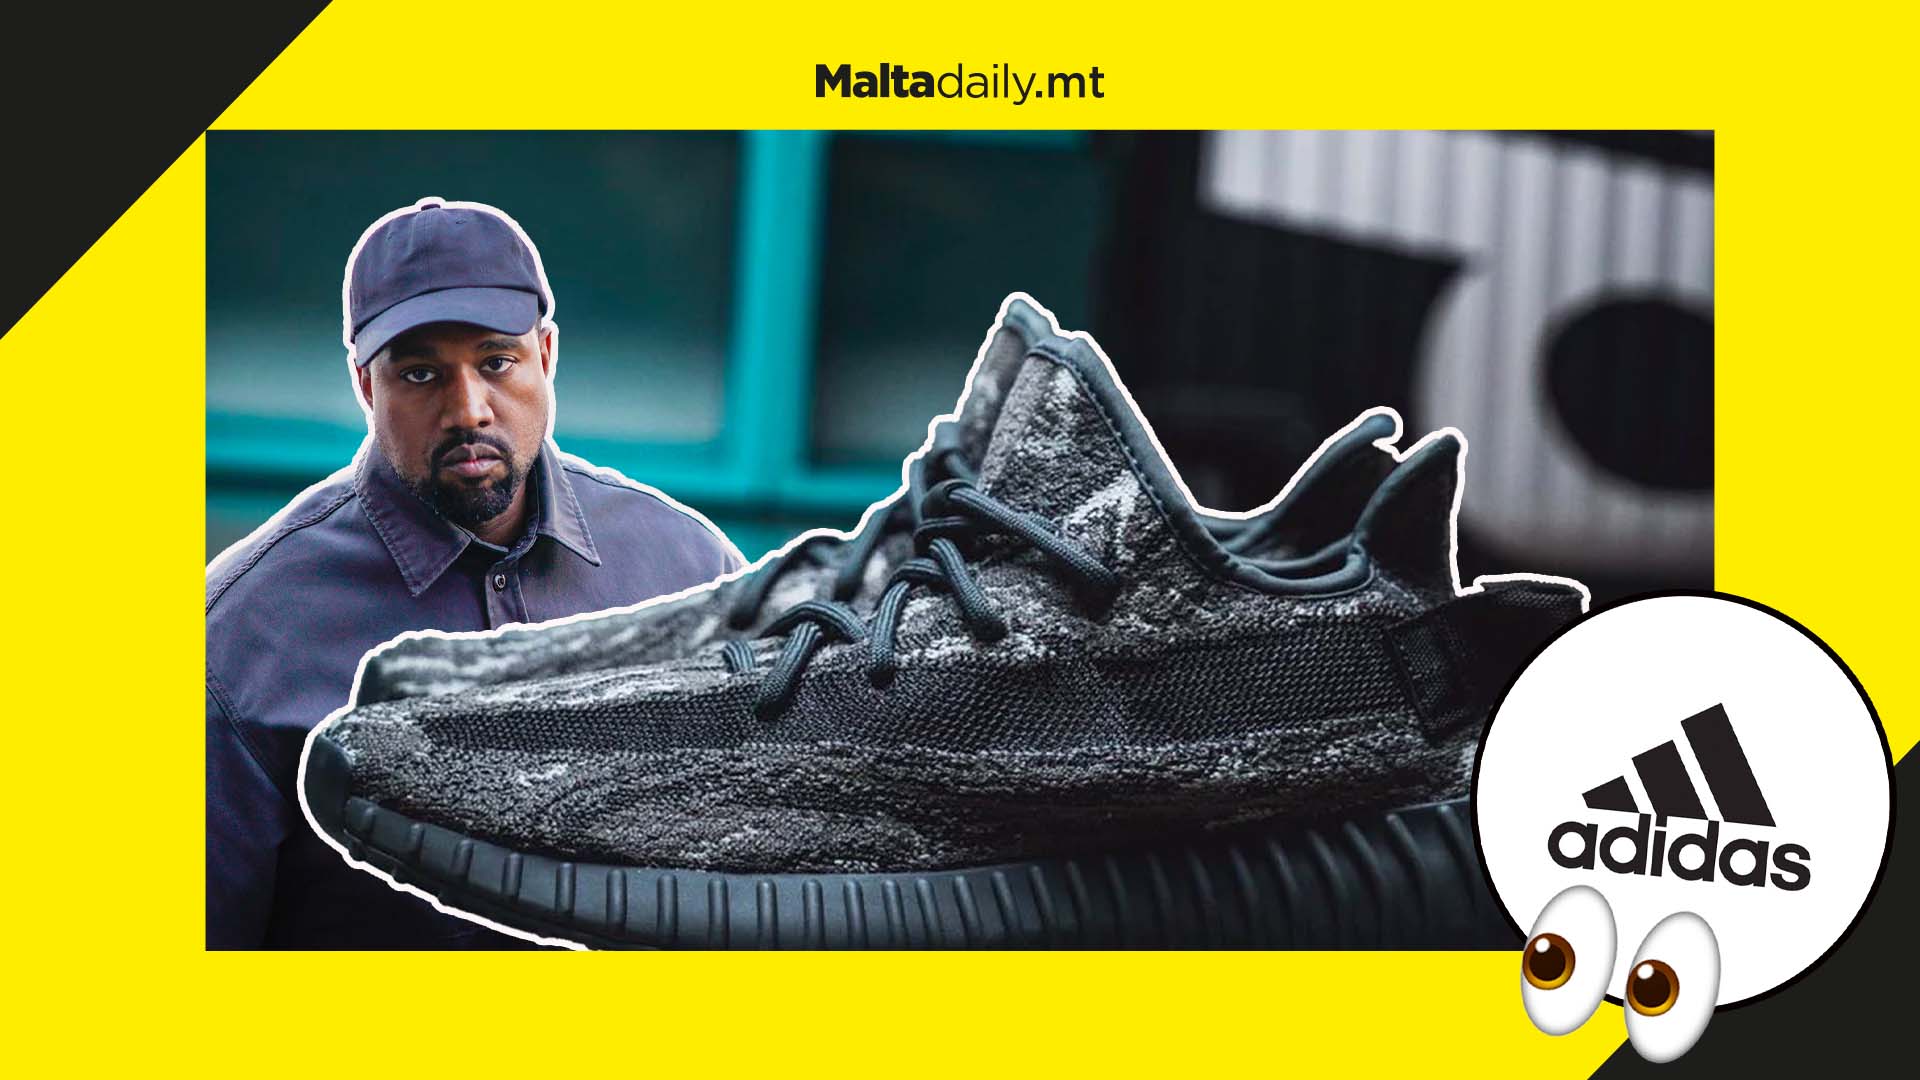 Adidas to continue Yeezy sales under new name after dropping Ye